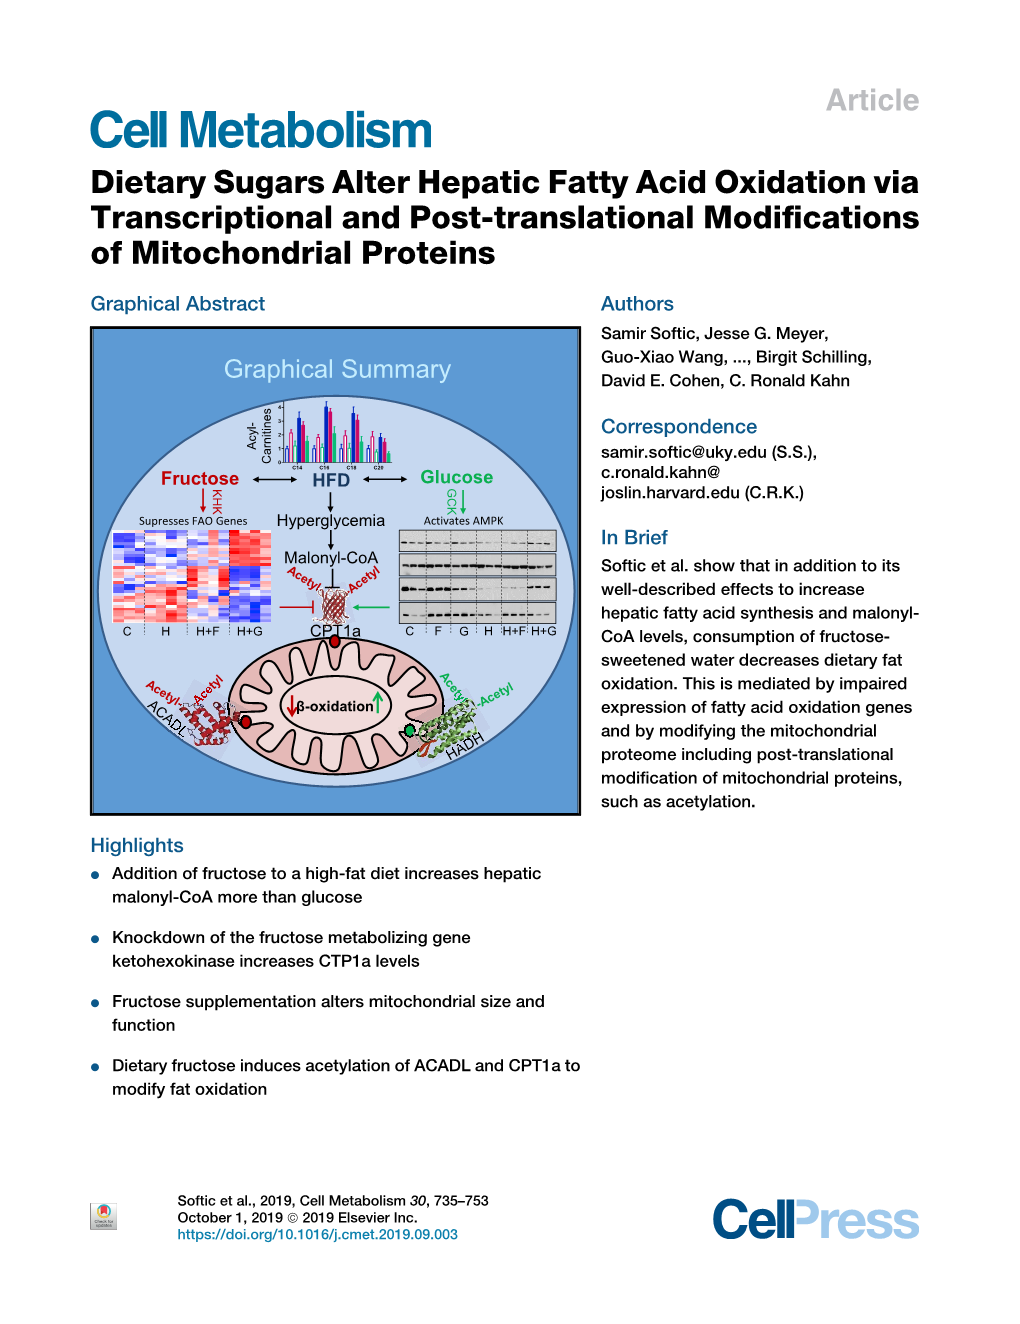 Dietary Sugars Alter Hepatic Fatty Acid Oxidation Via Transcriptional and Post-Translational Modiﬁcations of Mitochondrial Proteins